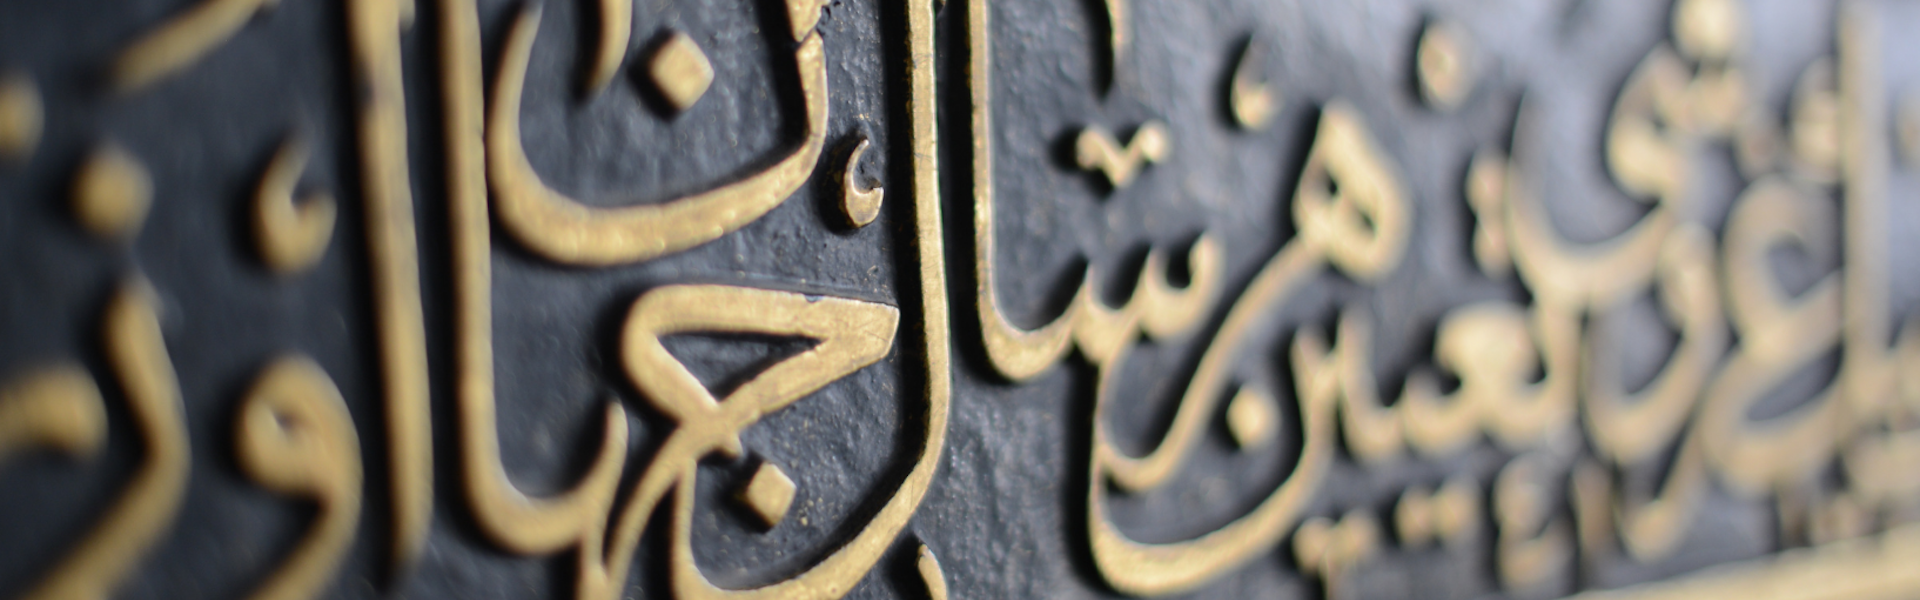 Arabic writing in gold on black background